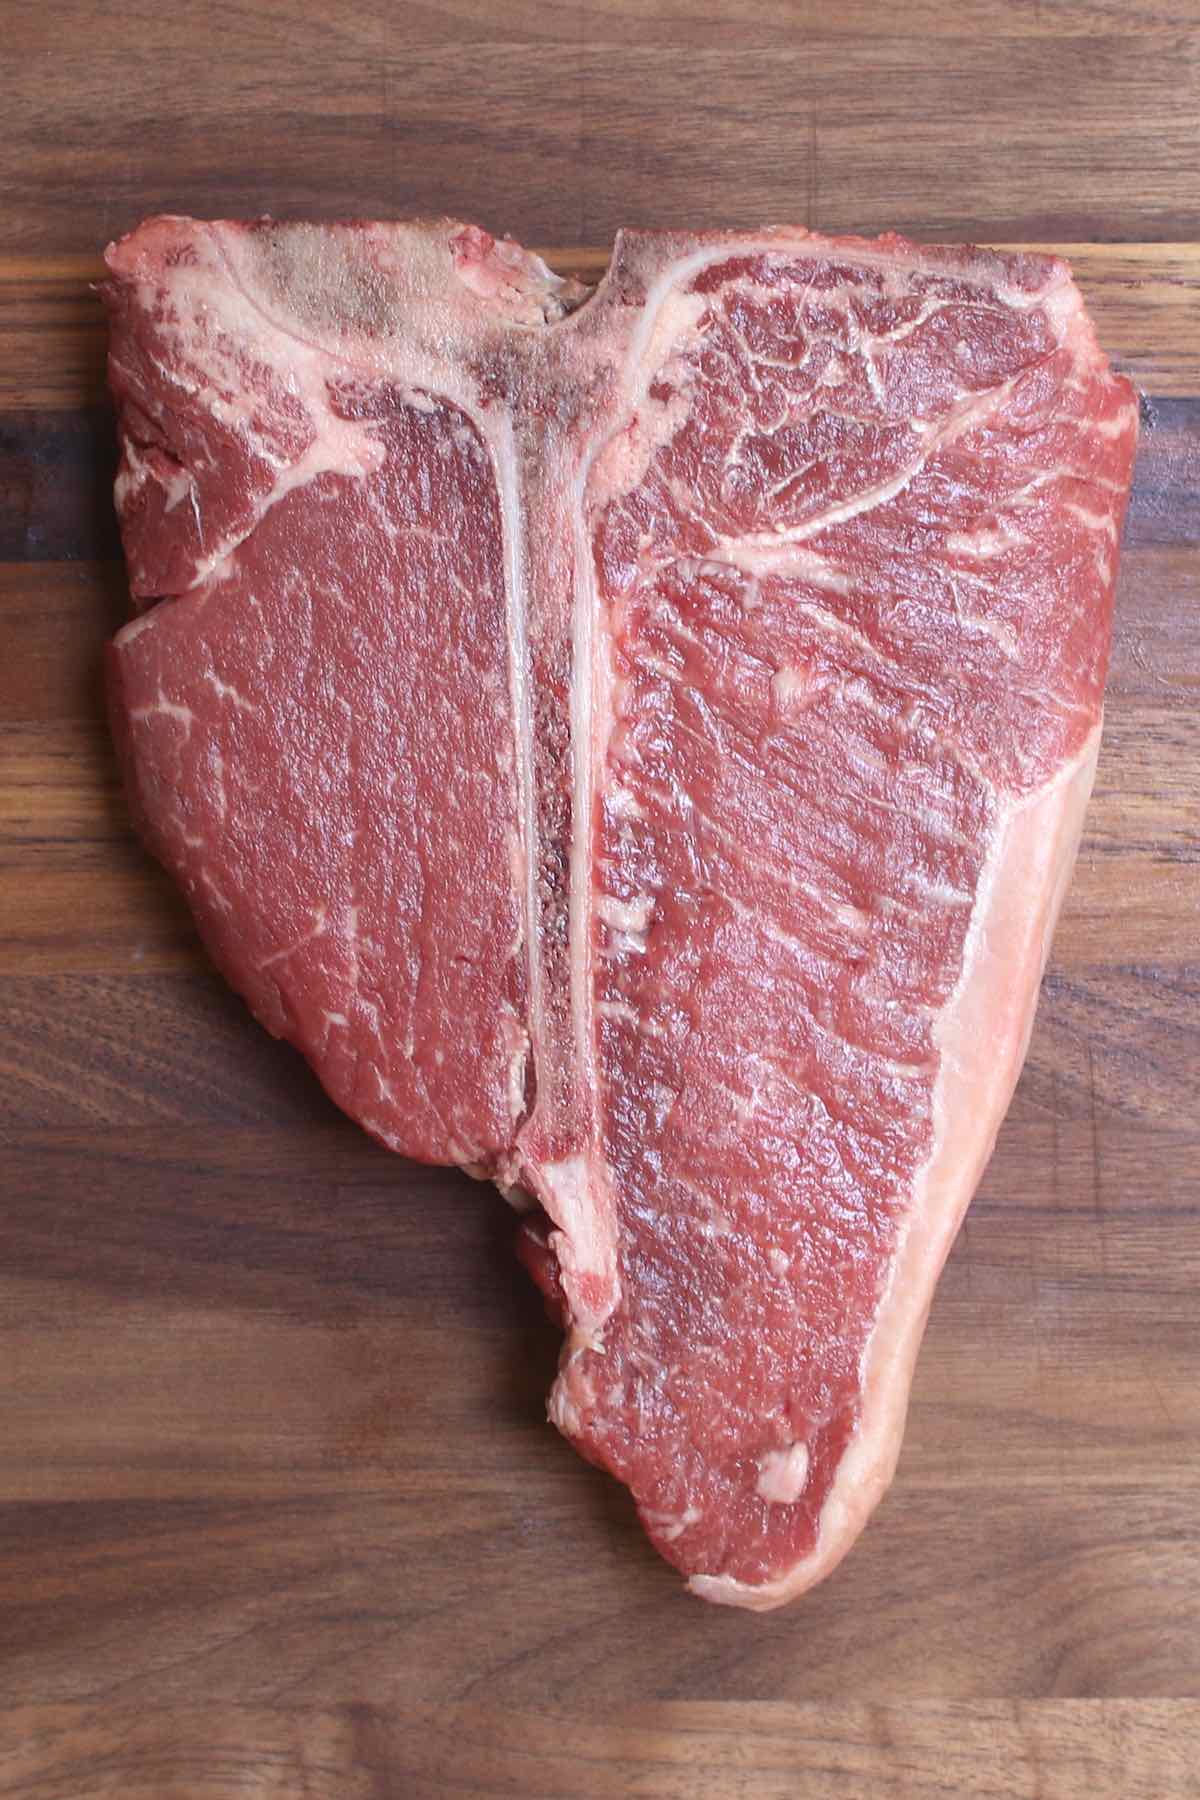 Overhead view of a raw porterhouse steak showing the t-shaped bone in the middle with the striploin on the right side and the much smaller tenderloin (filet mignon) on the left.